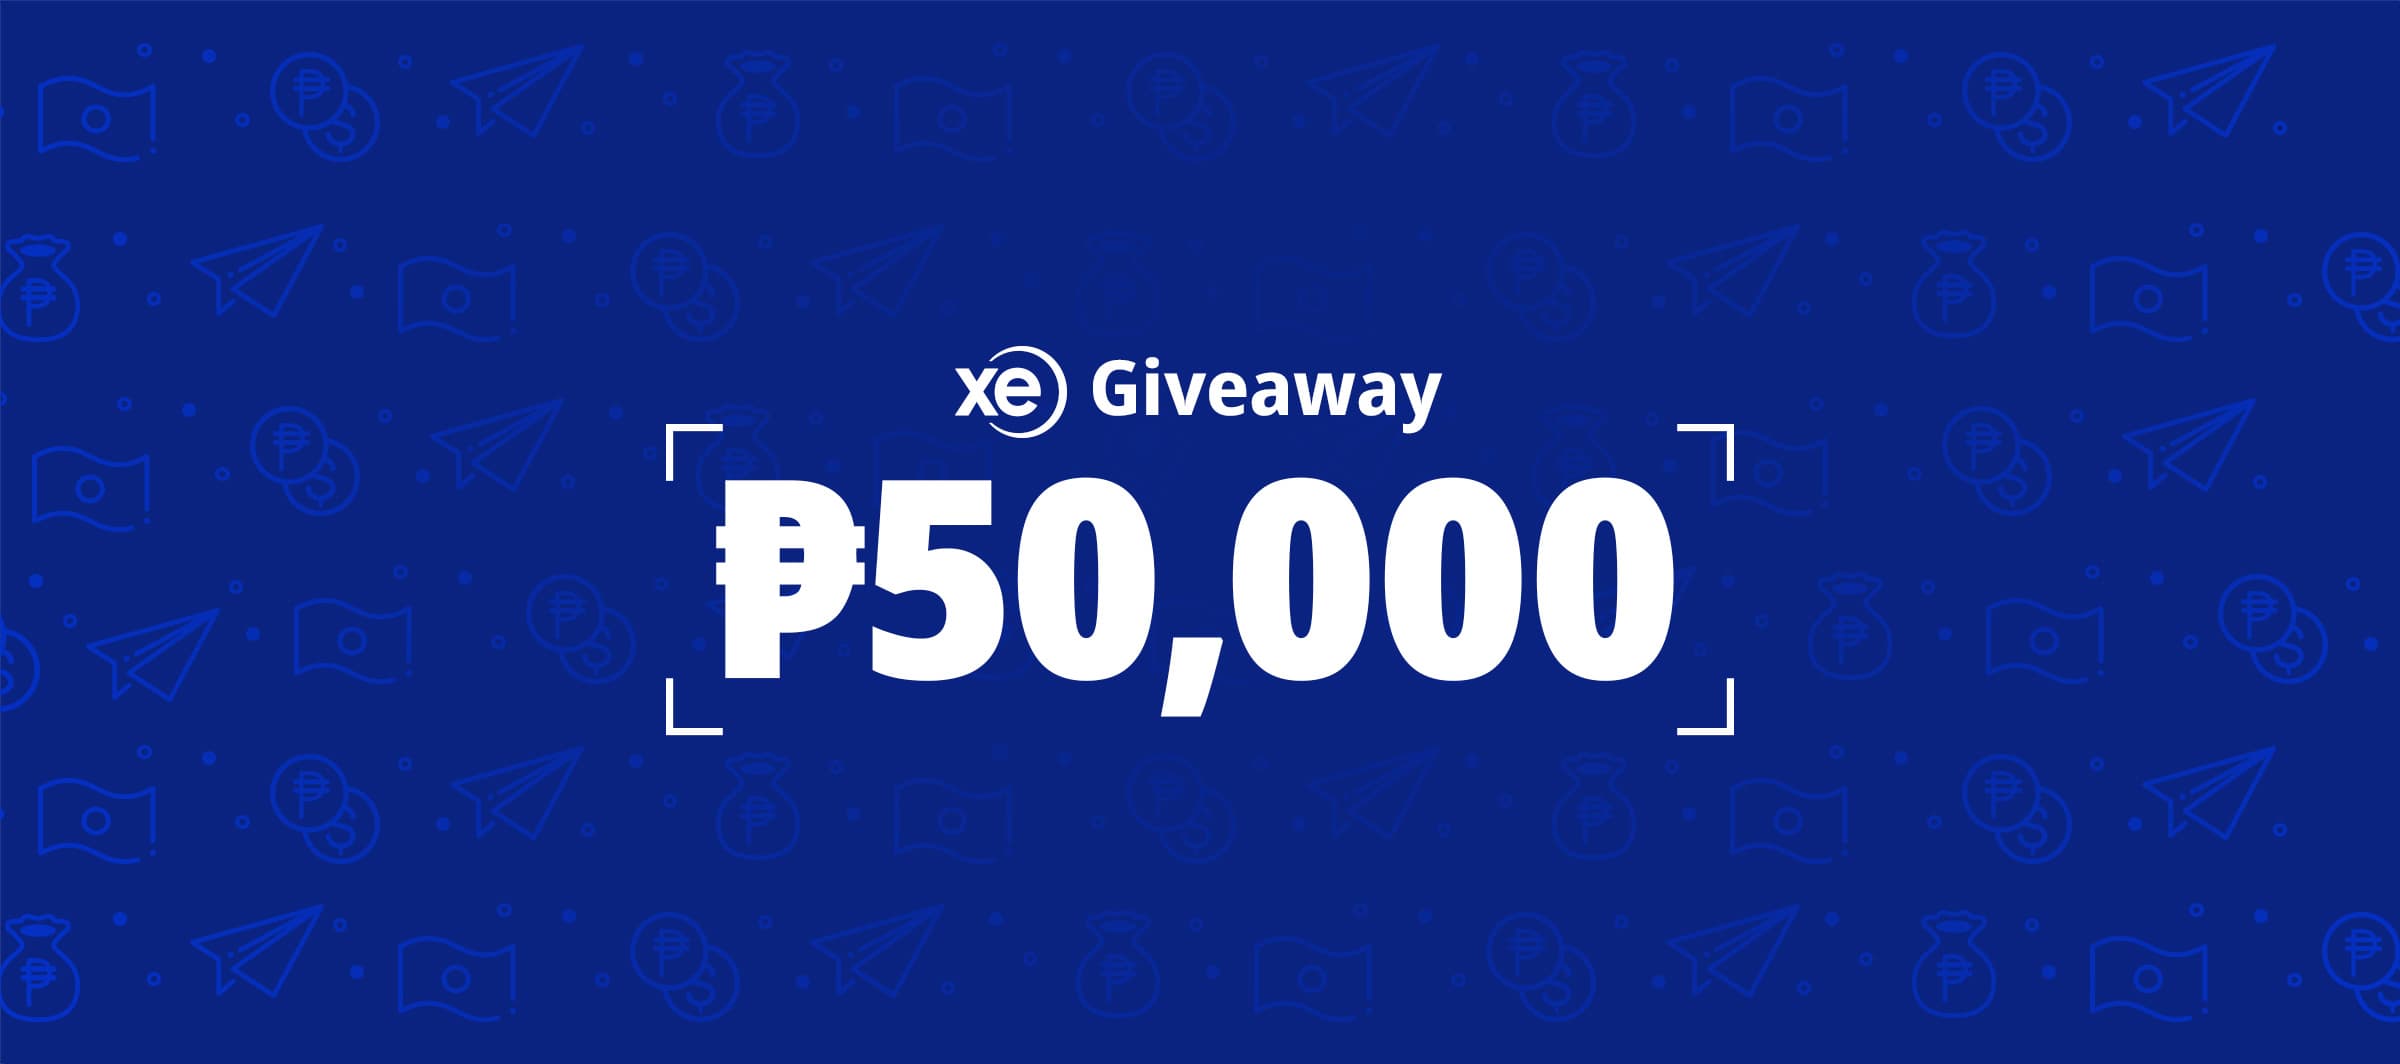 Xe Giveaway ₱50,000